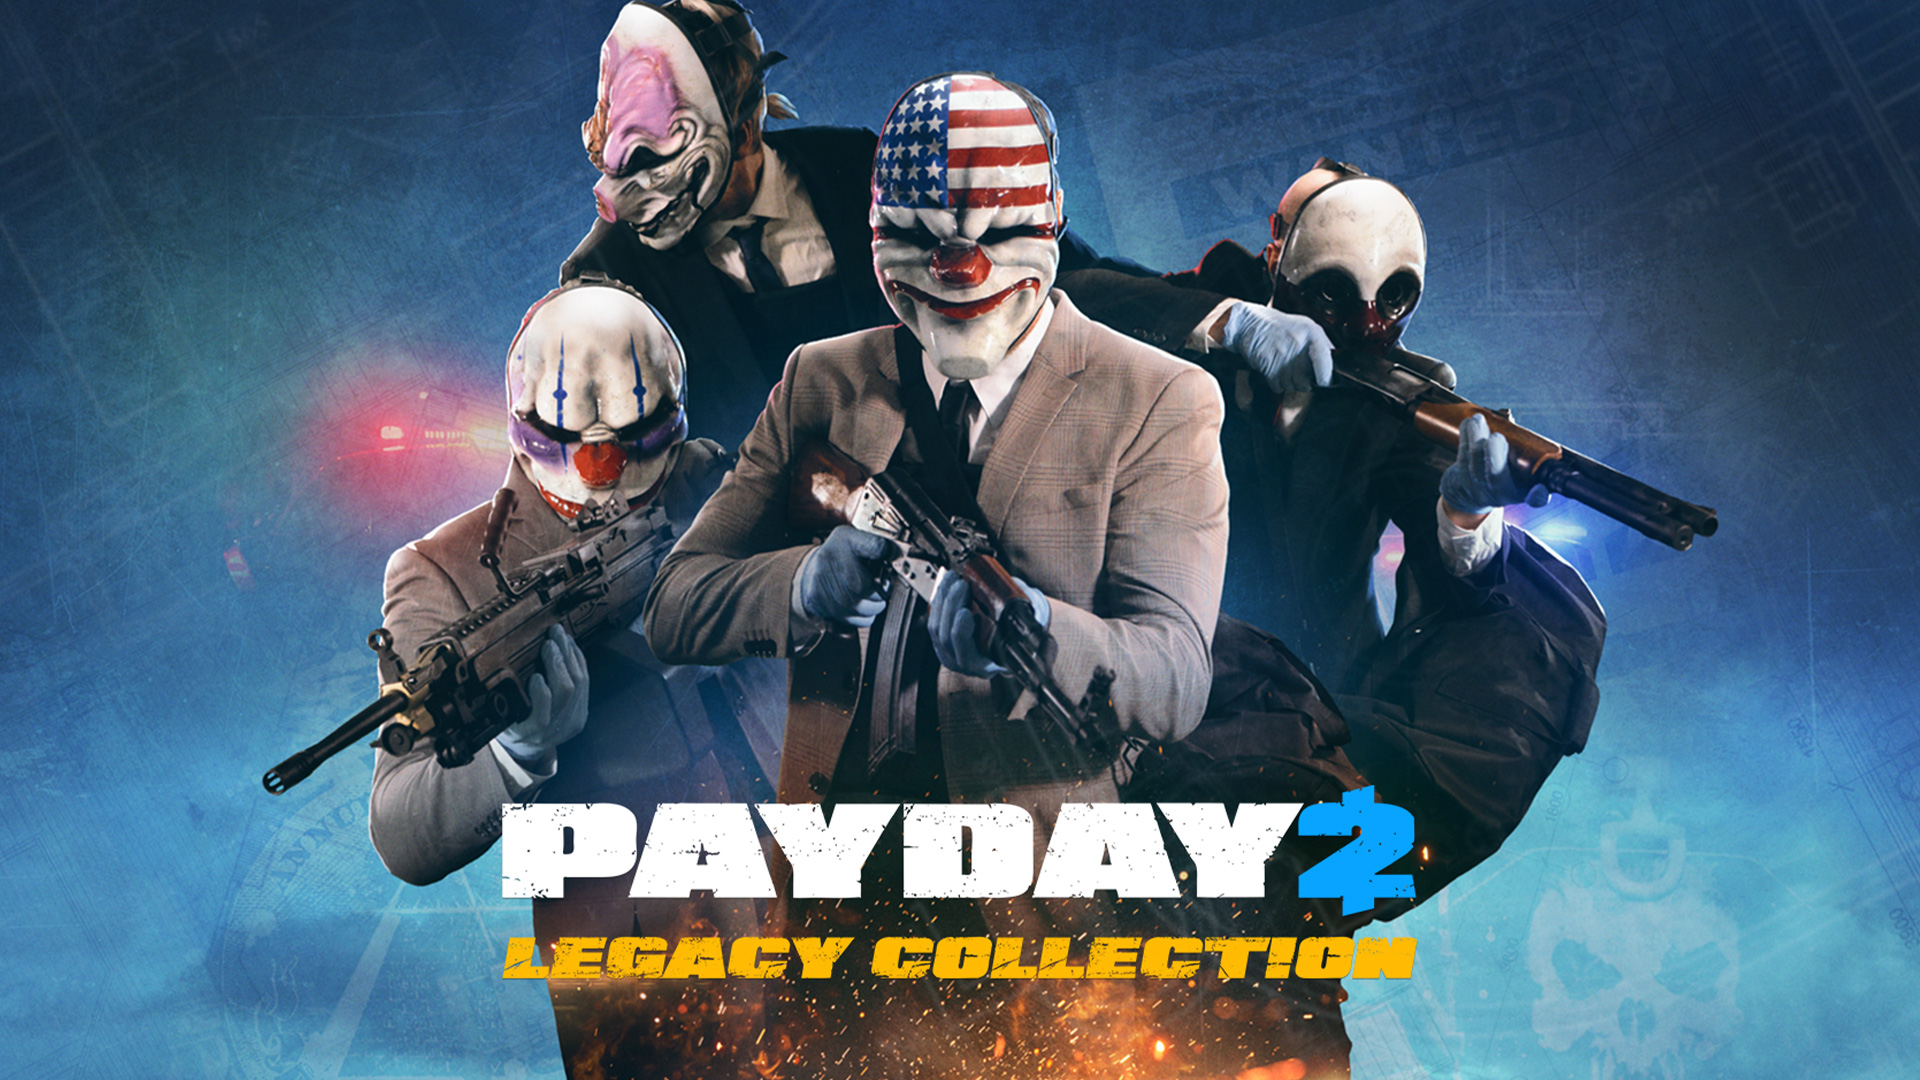 Cook faster для payday 2 фото 3